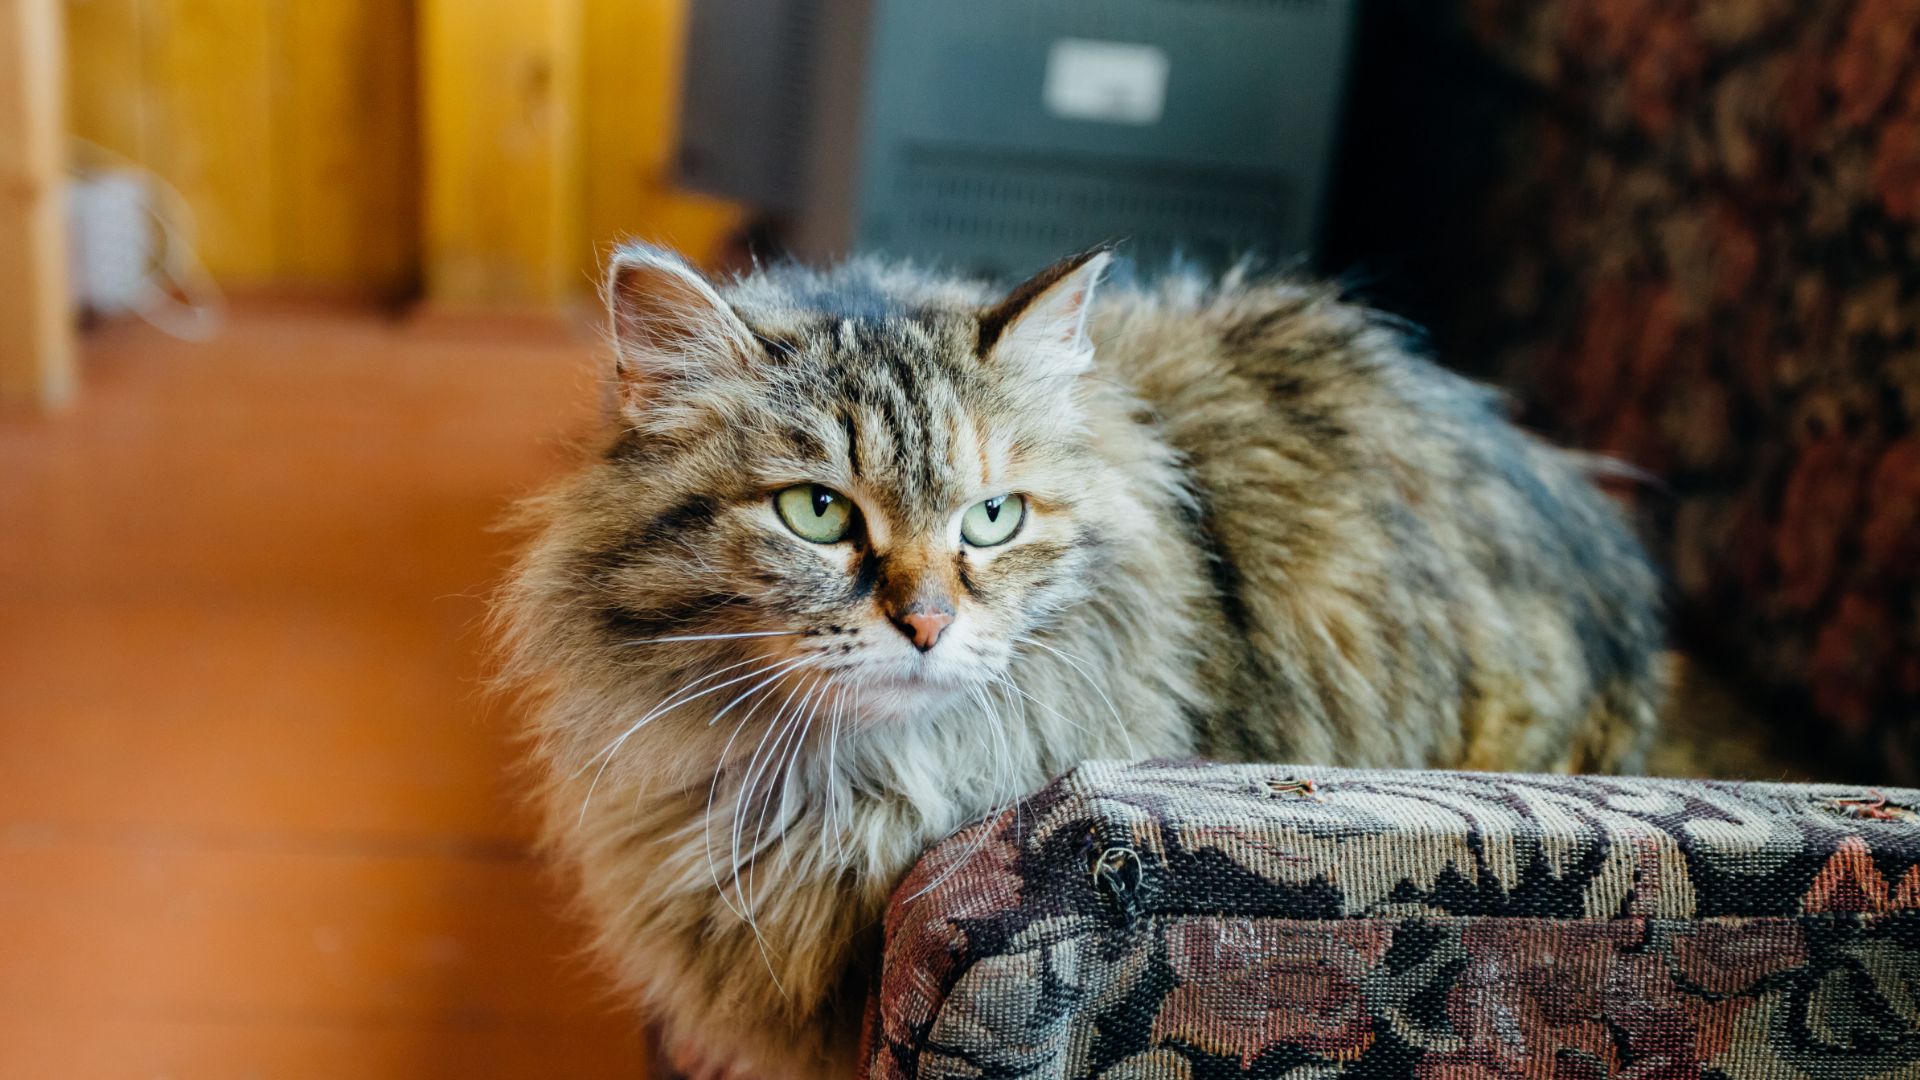 Siberian forest cat sitting on couch